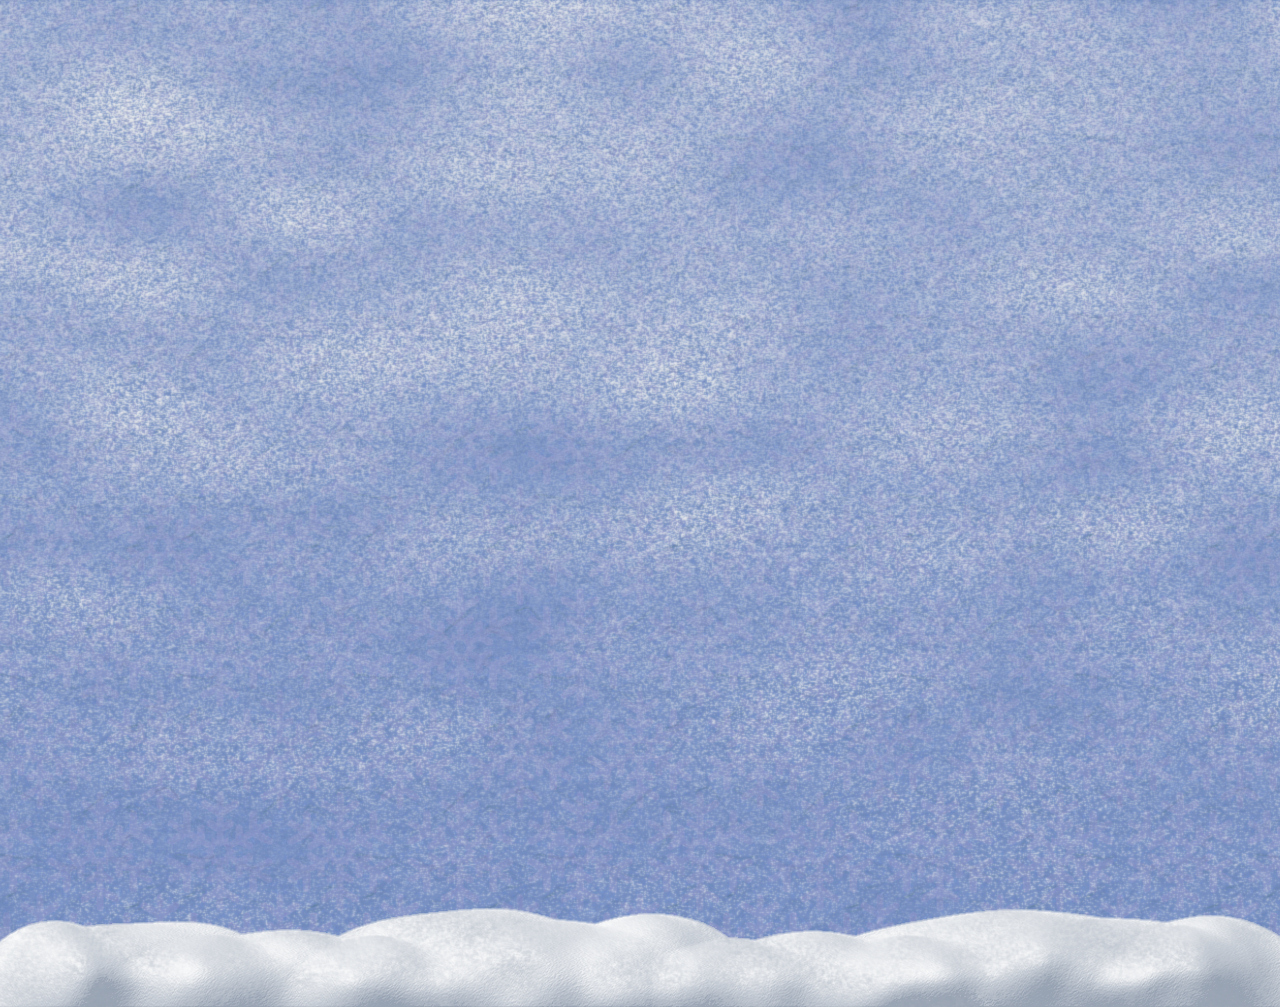 Snowy Day Backgrounds